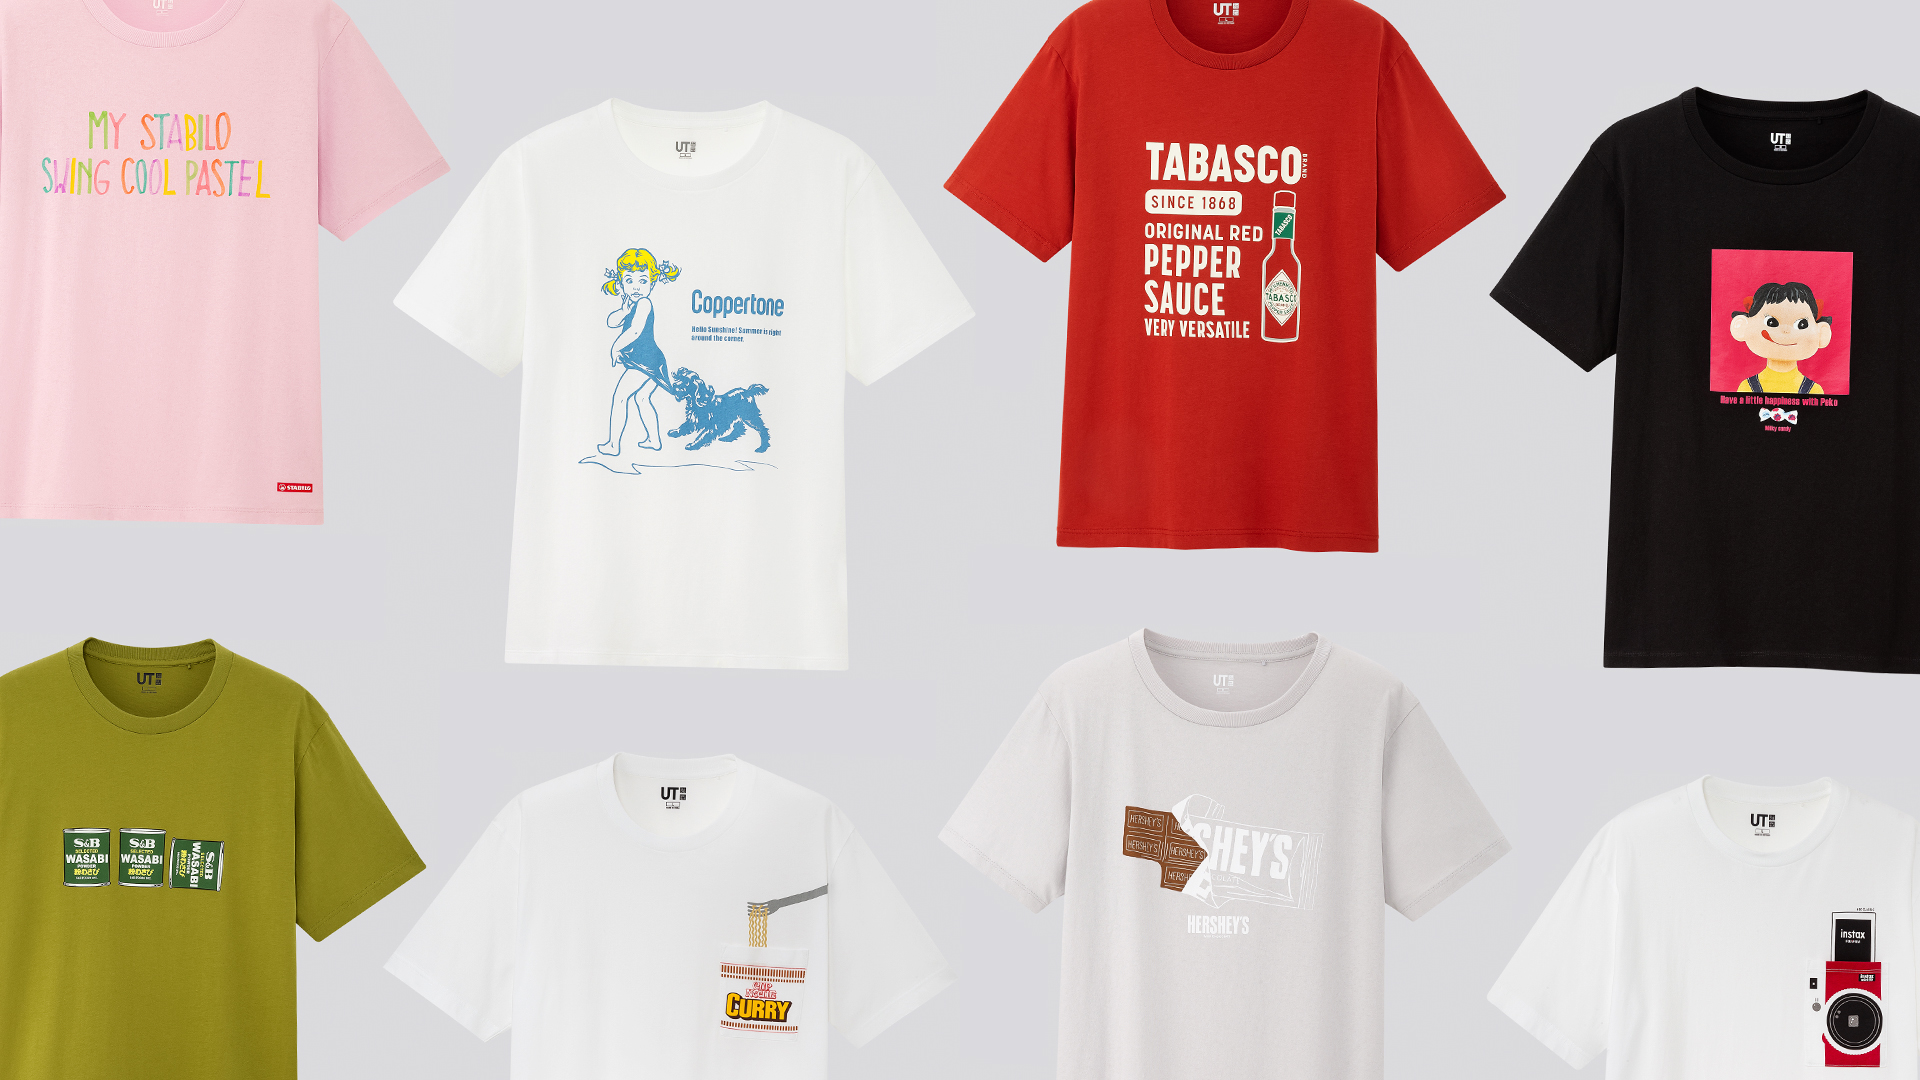 Get Free Cup Noodles & A Much-Needed Burst Of Cheer With Uniqlo's The ...